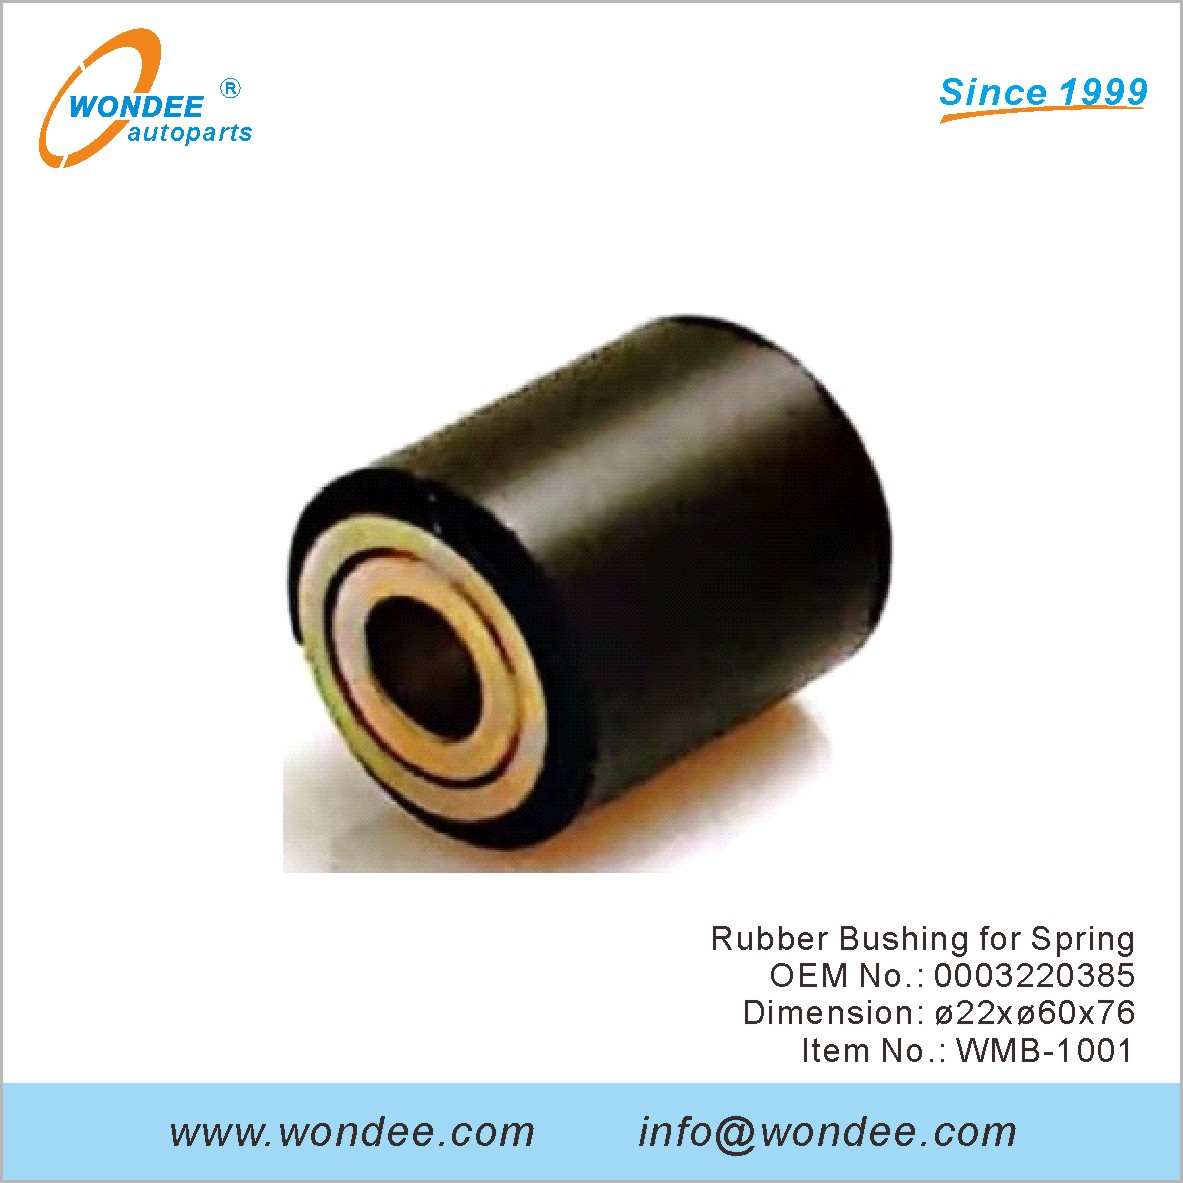 Rubber Bushing for Spring OEM 0003220385 for Benz from WONDEE